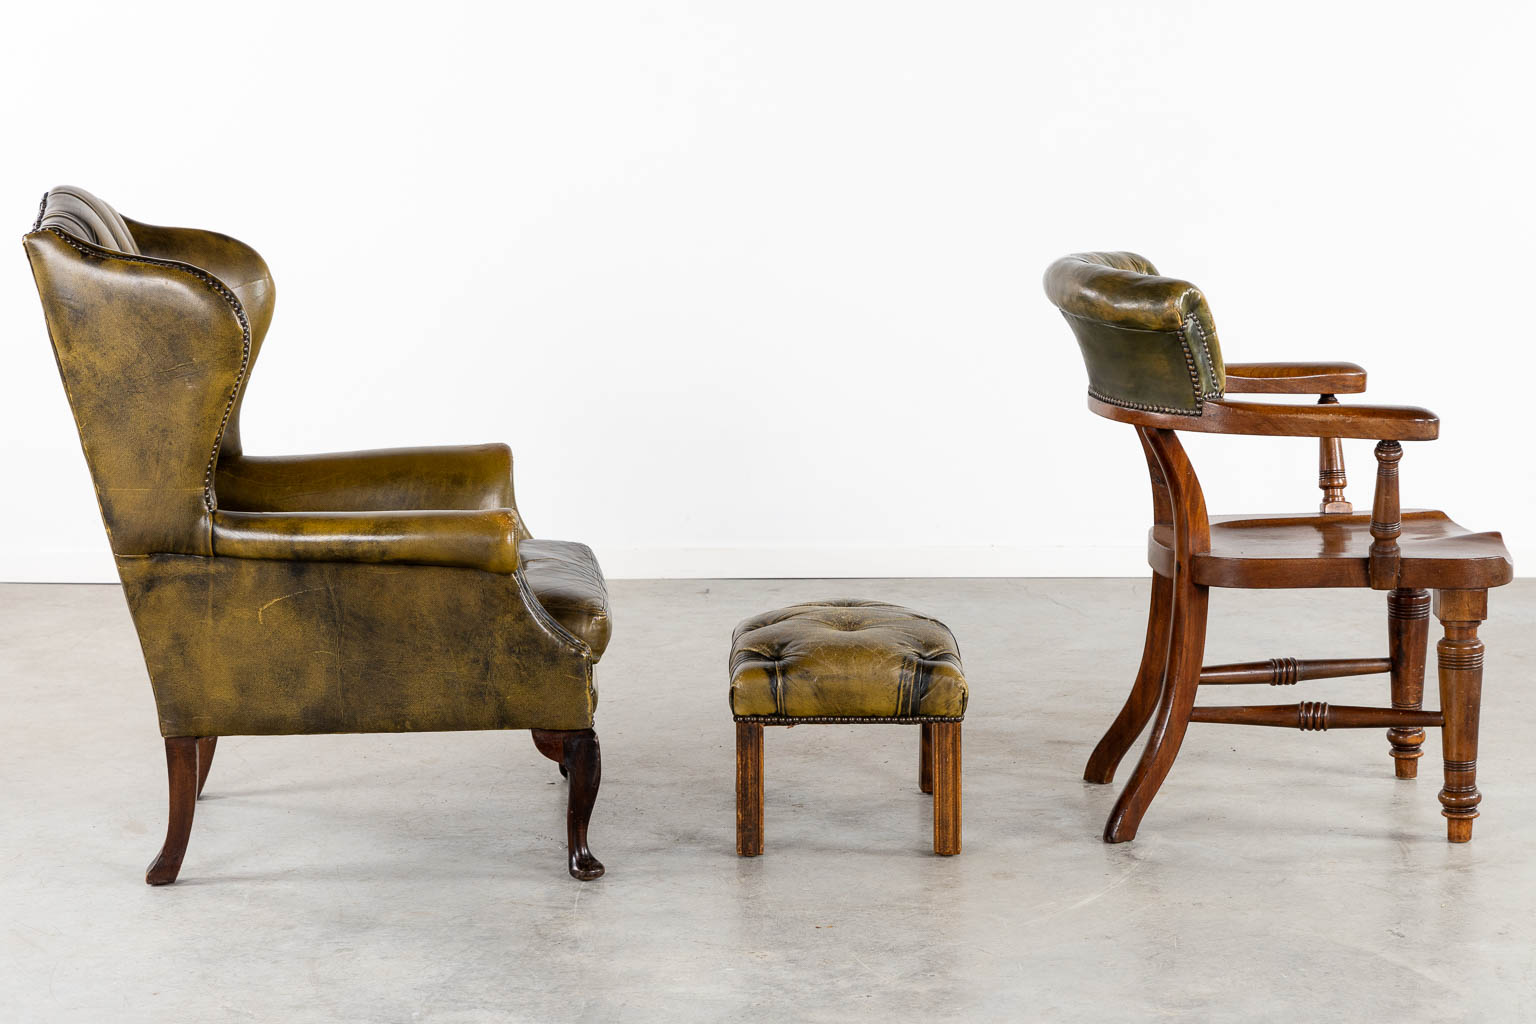 A Lounge chair, office chair and ottoman, Leather on wood, Chesterfield. (L:84 x W:80 x H:100 cm) - Image 6 of 13